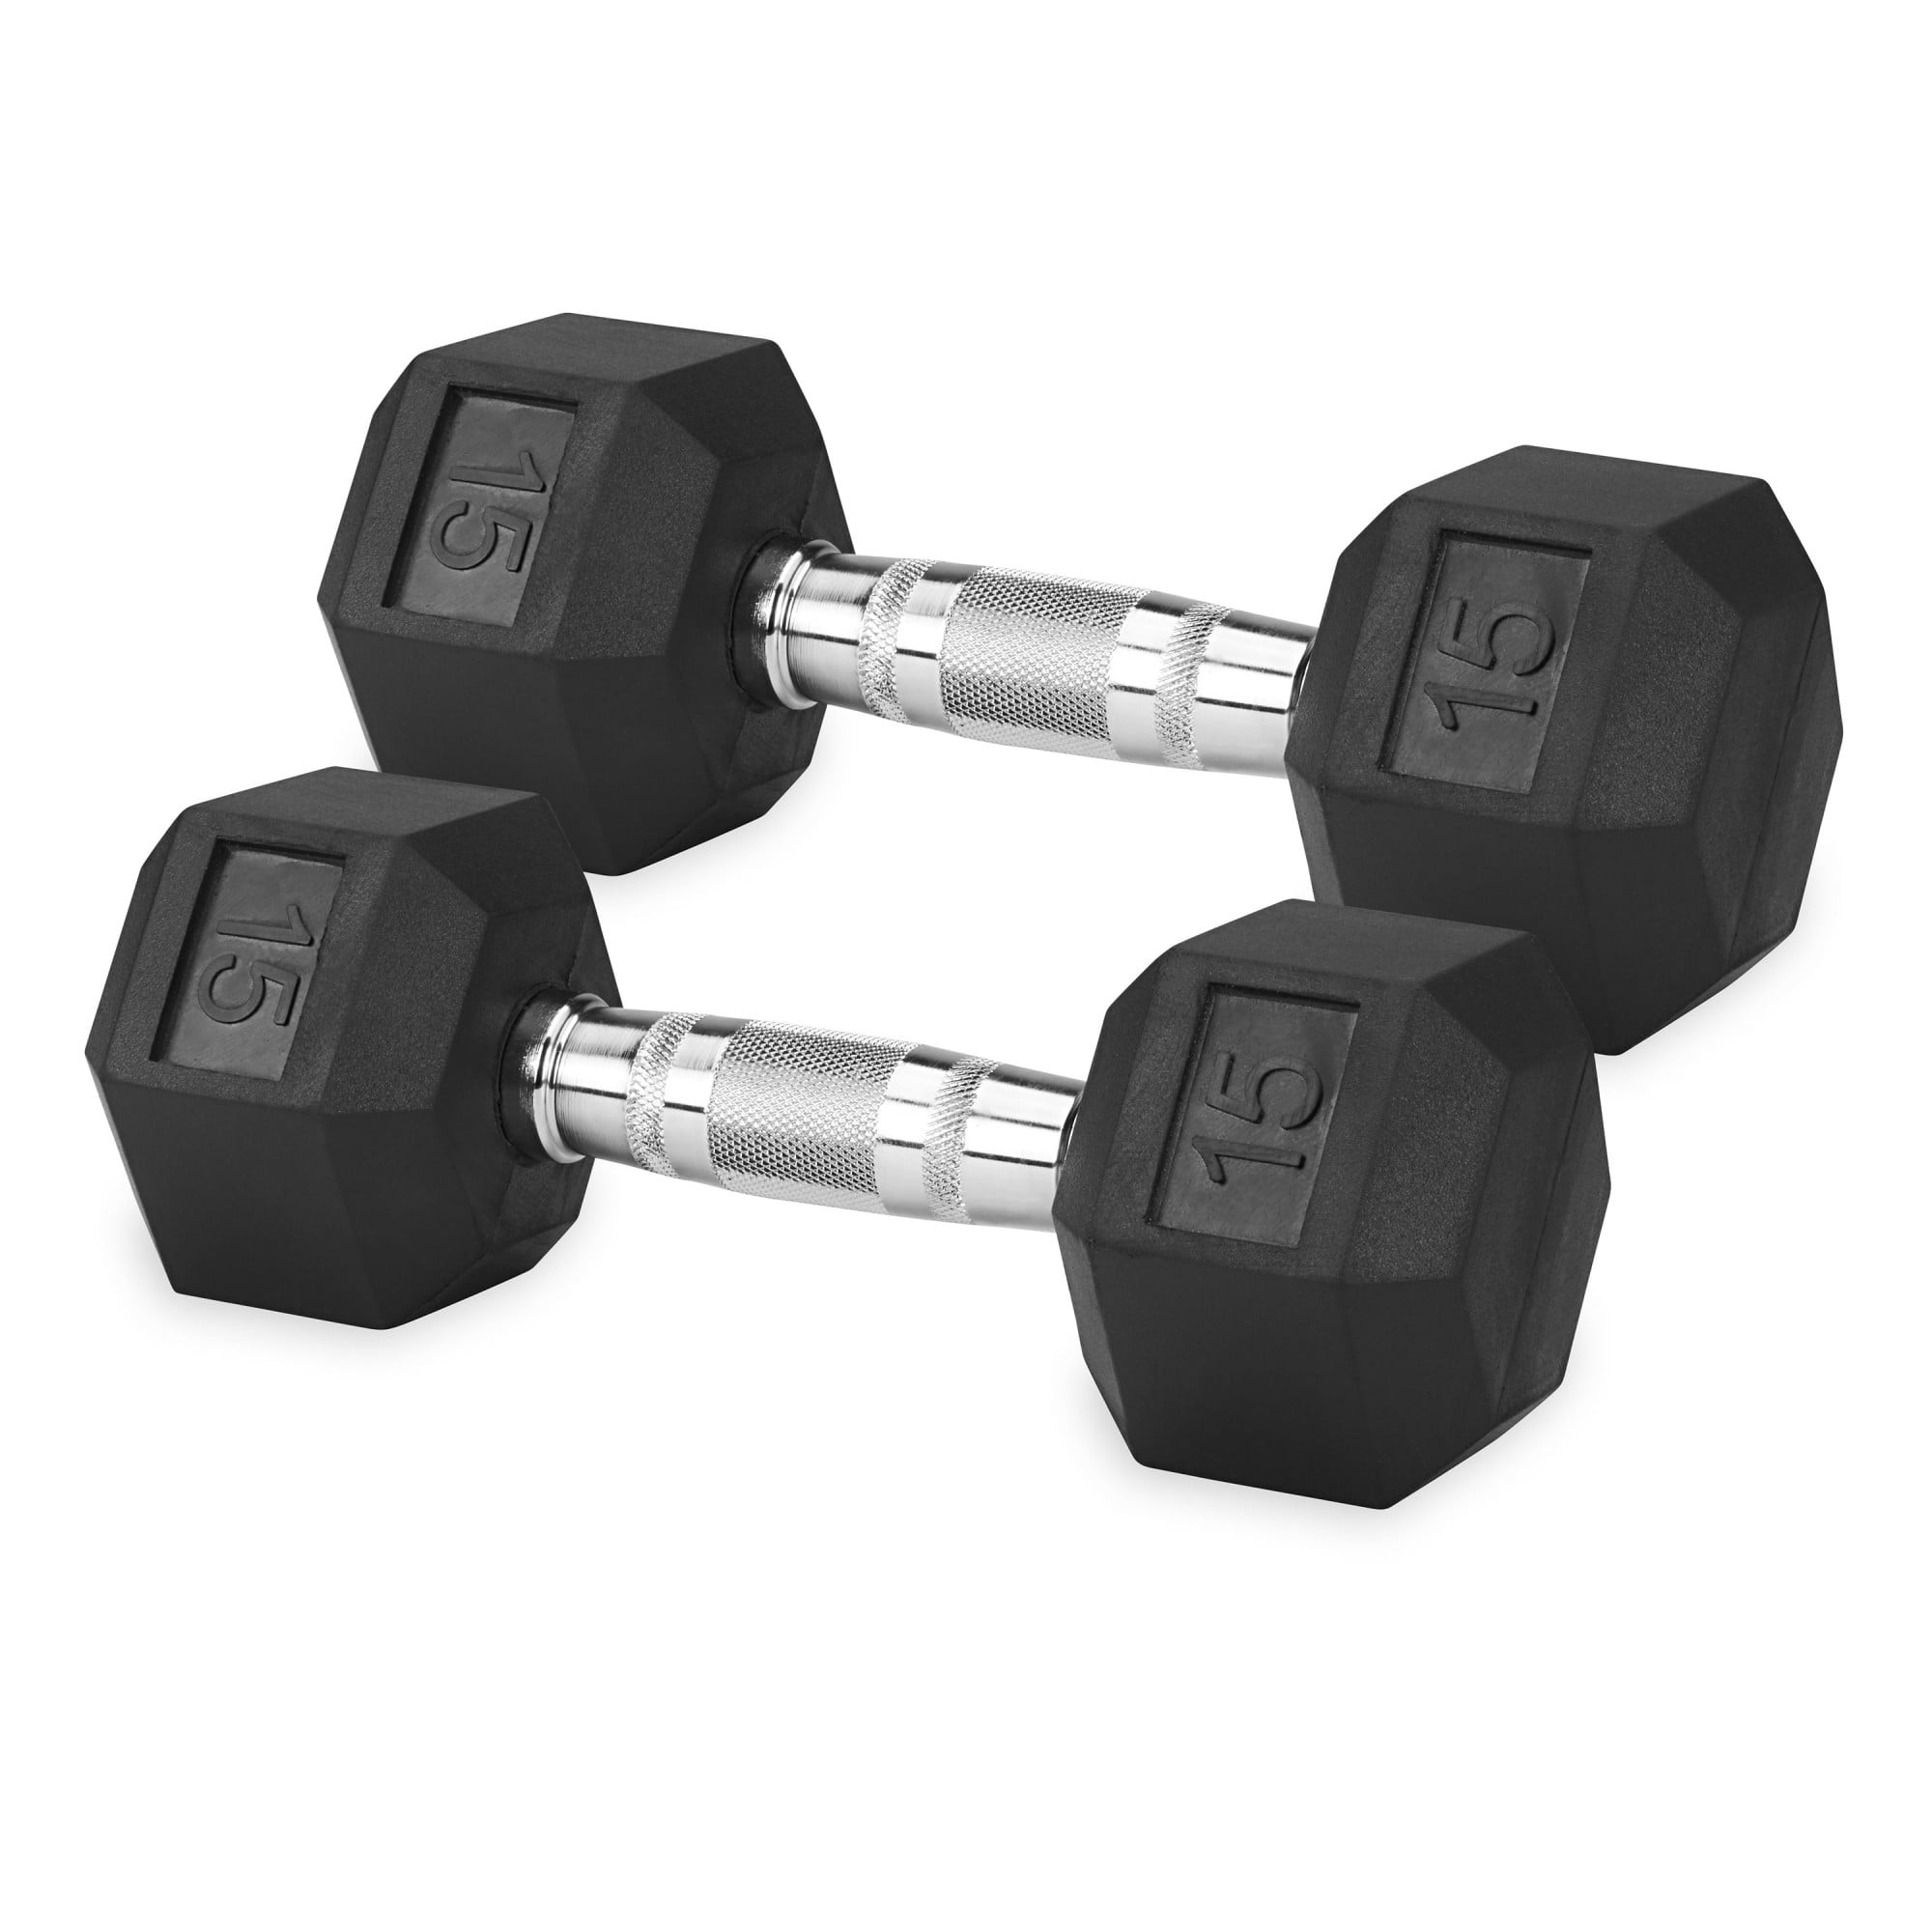 Well-Fit Rubber and Cast Iron Hex Dumbbell Set, 20 Lbs., Black, Includes 2 Weights